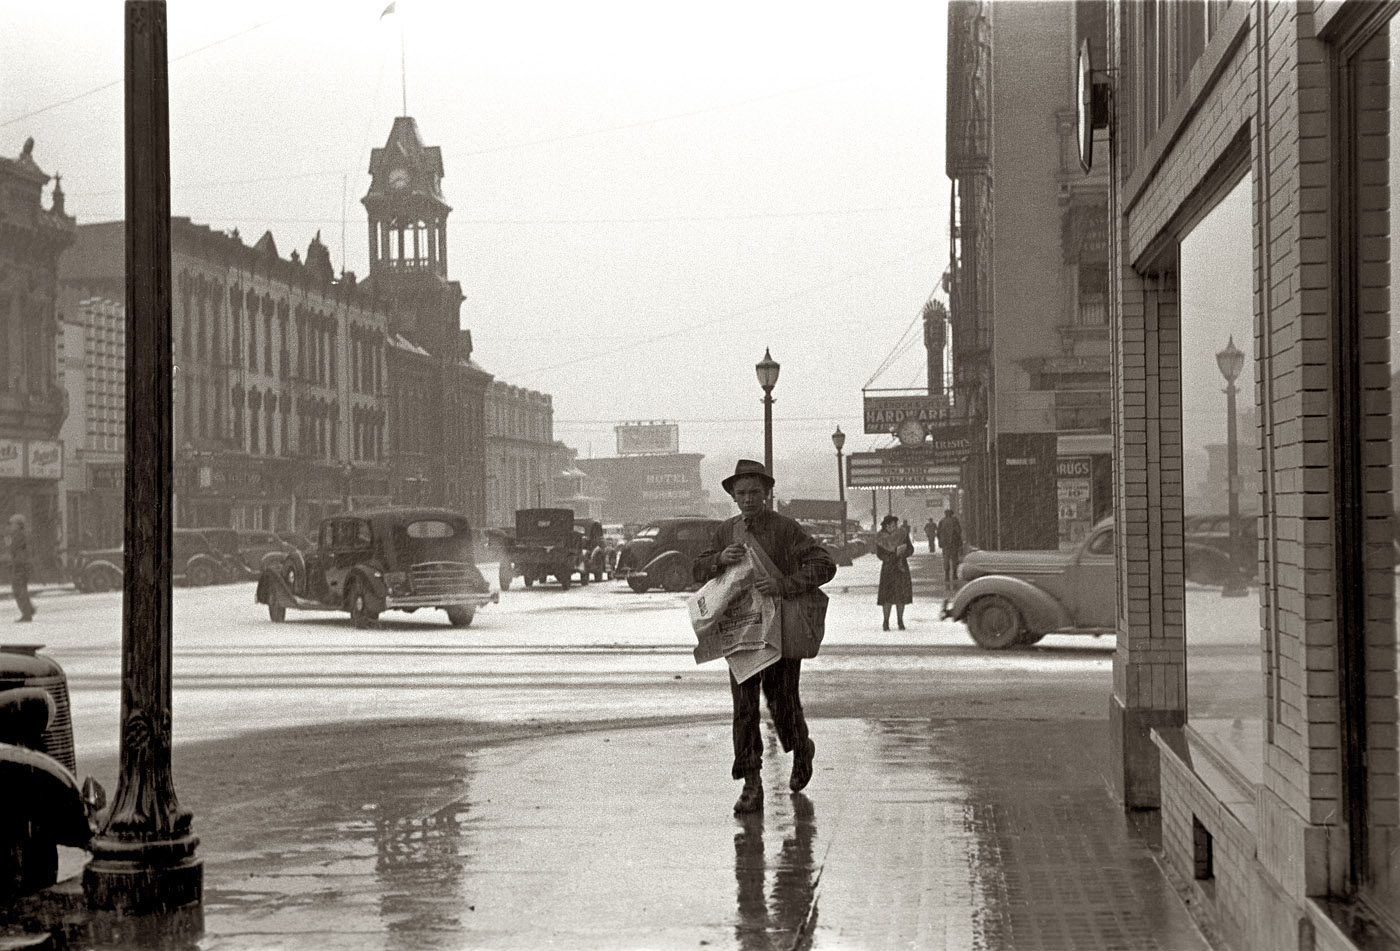 February 1940. Newsboy during a winter storm in Iowa City, Iowa. 35mm nitrate negative by Arthur Rothstein, Farm Security Administration. View full size. Our readers point out the Englert Theater to the right, where "Balalaika" is playing.